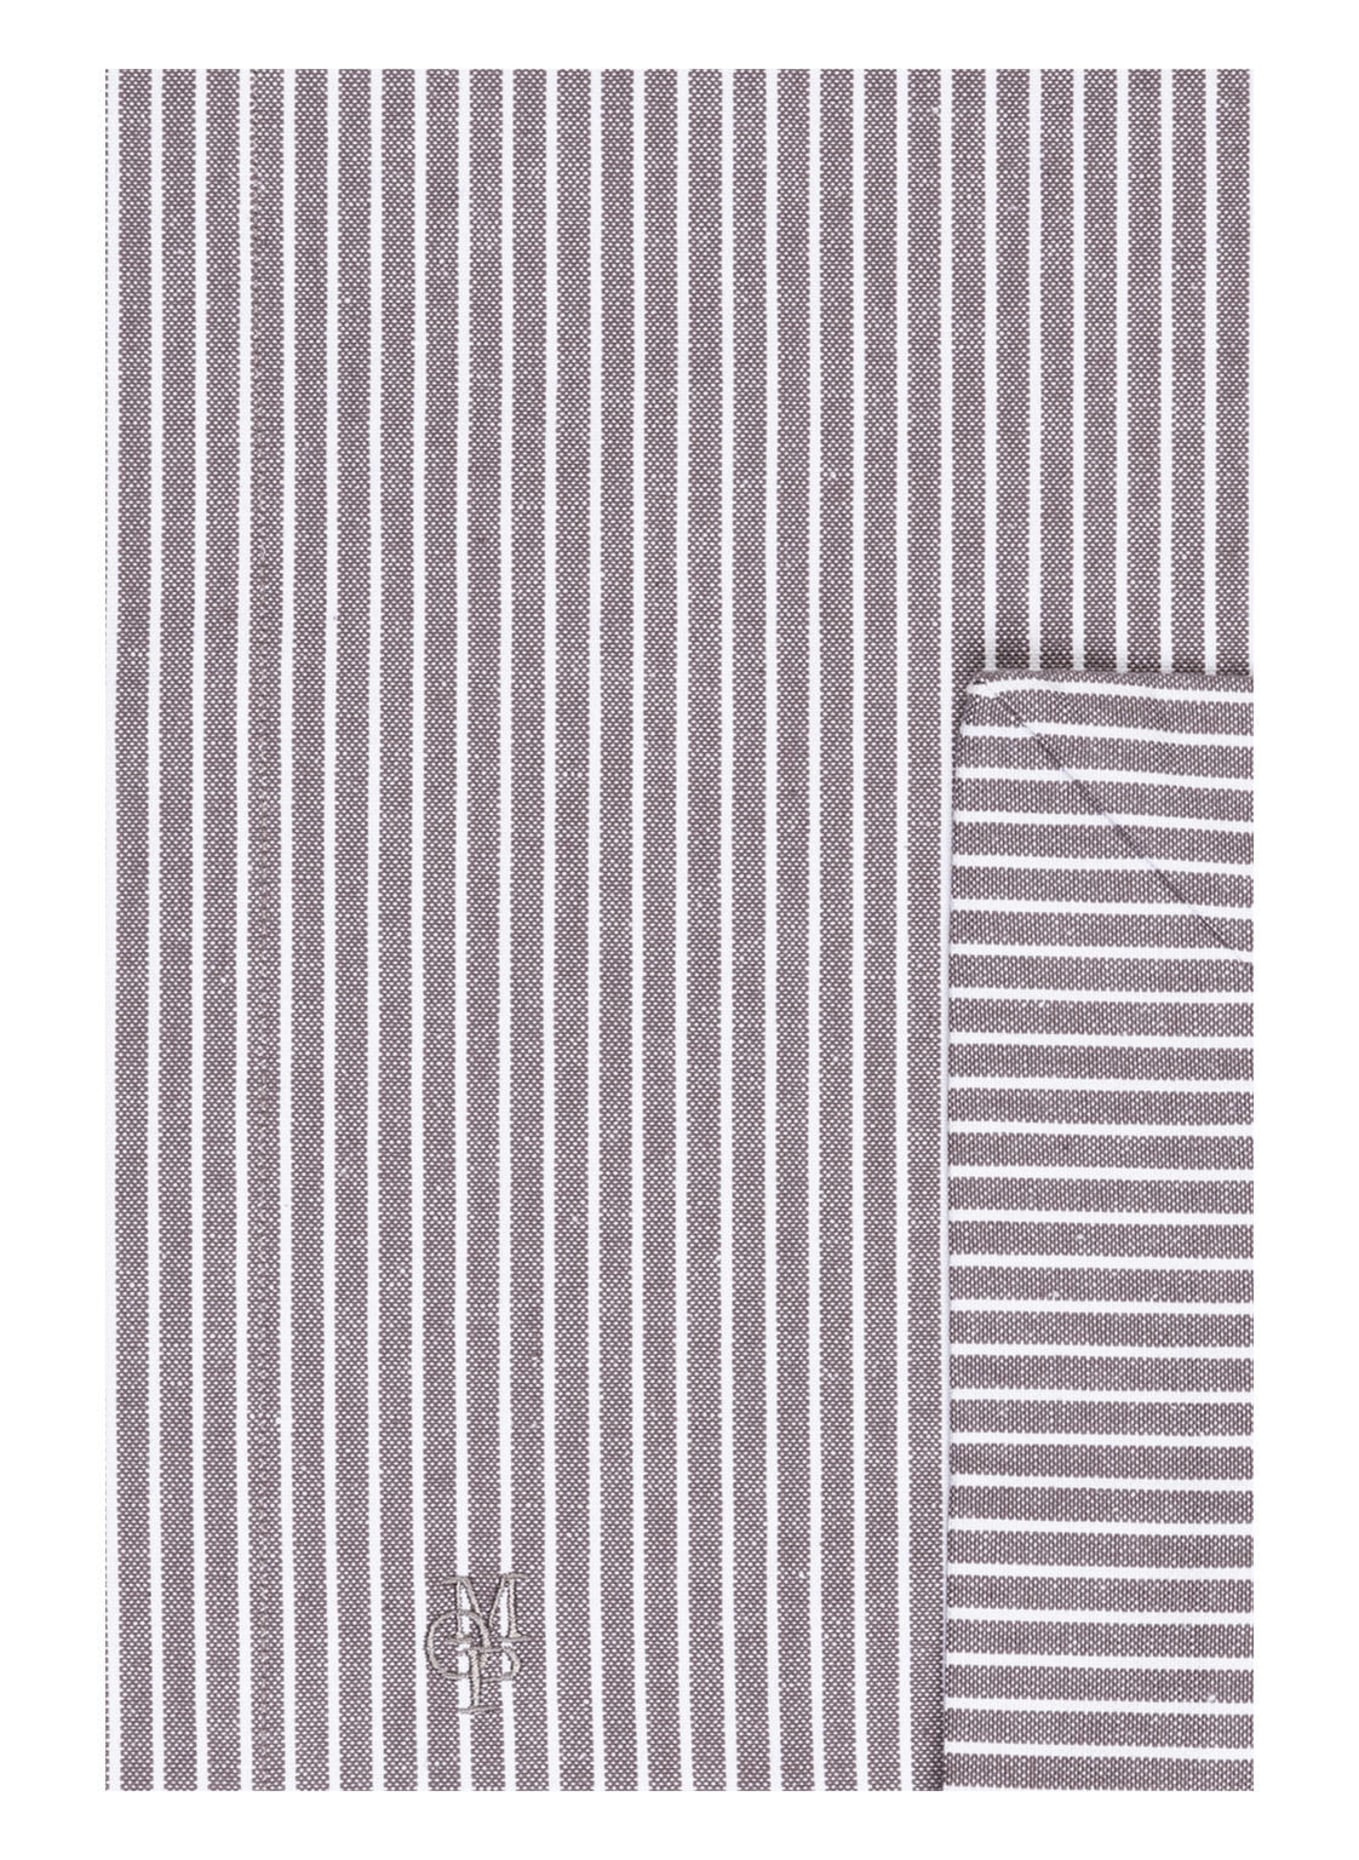 Marc O'Polo Table runner TENSTRA, Color: LIGHT GRAY / WHITE STRIPED (Image 3)